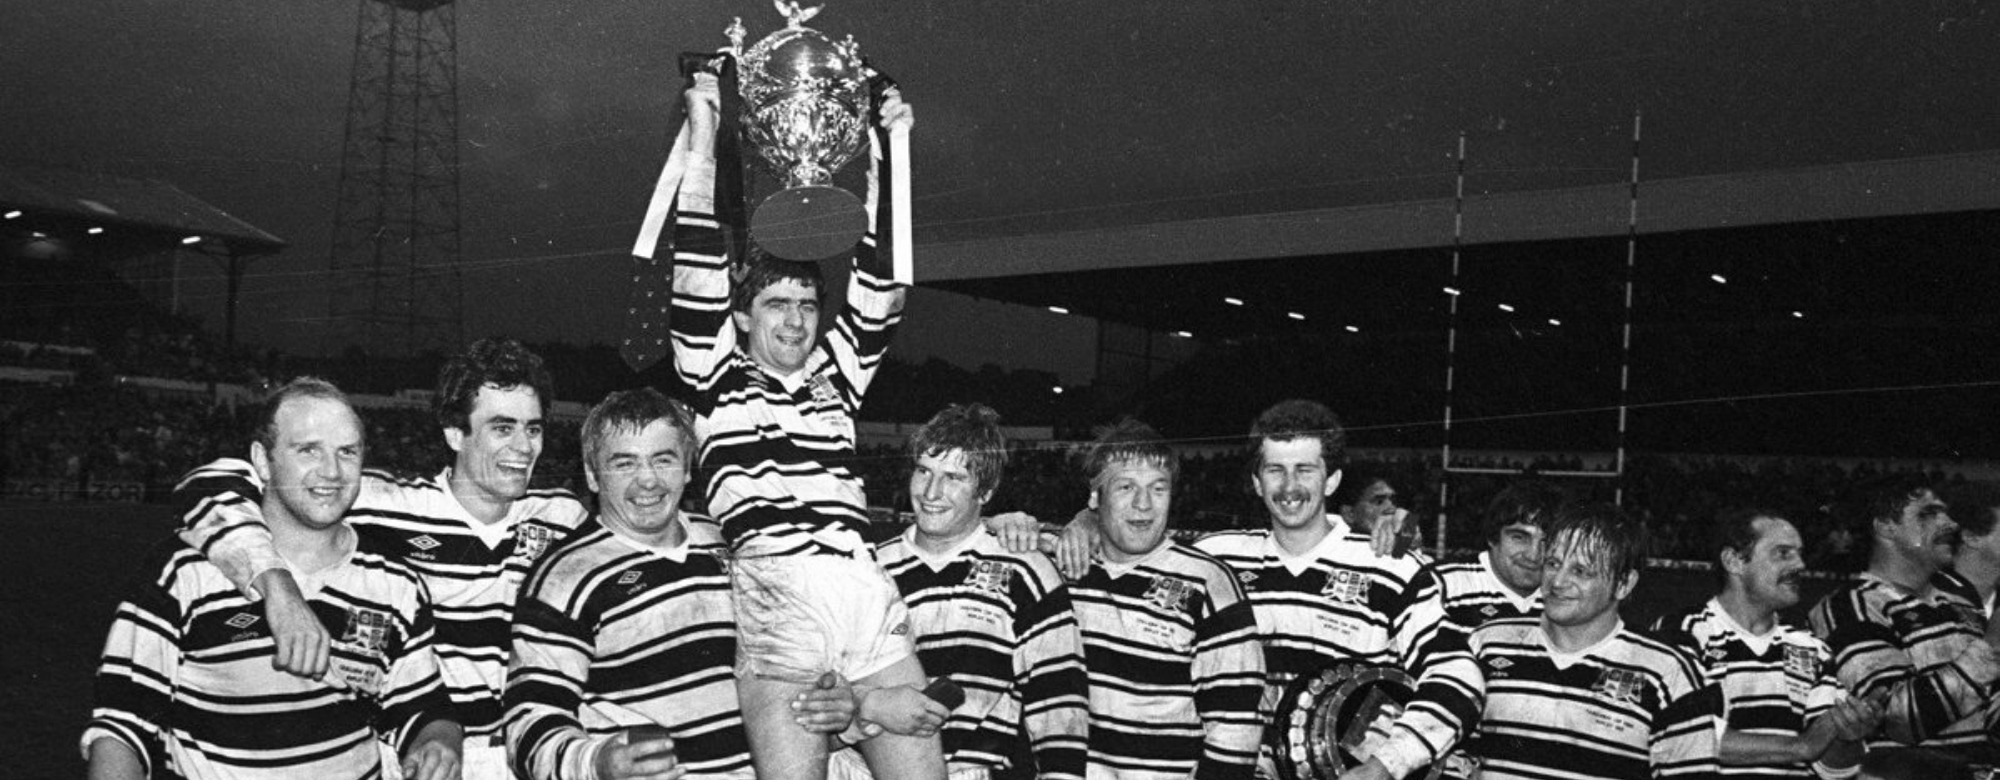 On This Day: 1982 Challenge Cup Final Replay